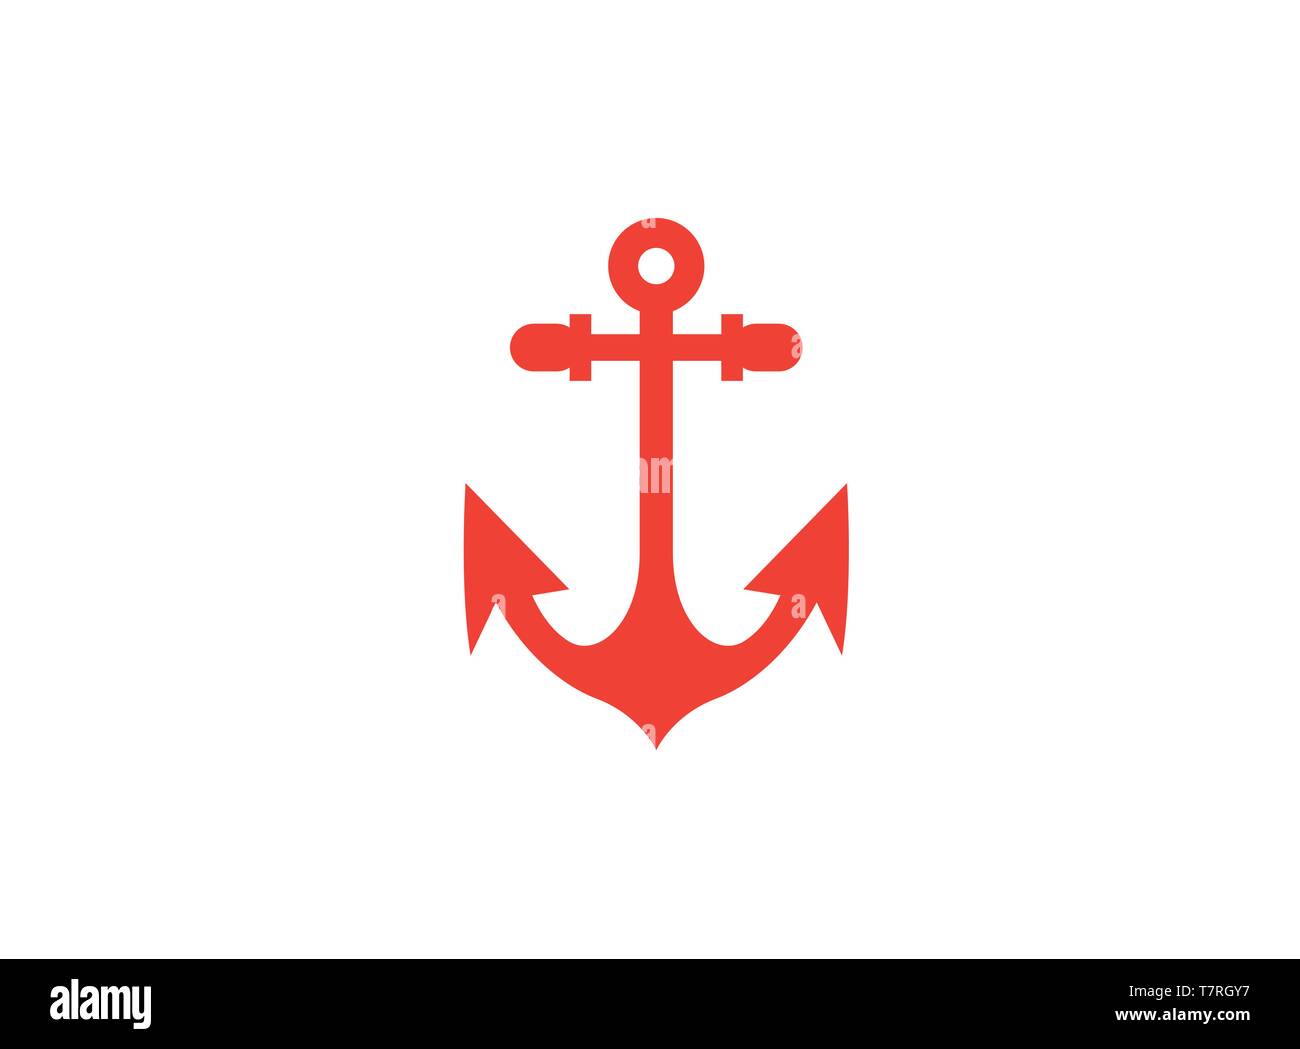 Red anchor for boat and yacht logo vector design illustration on